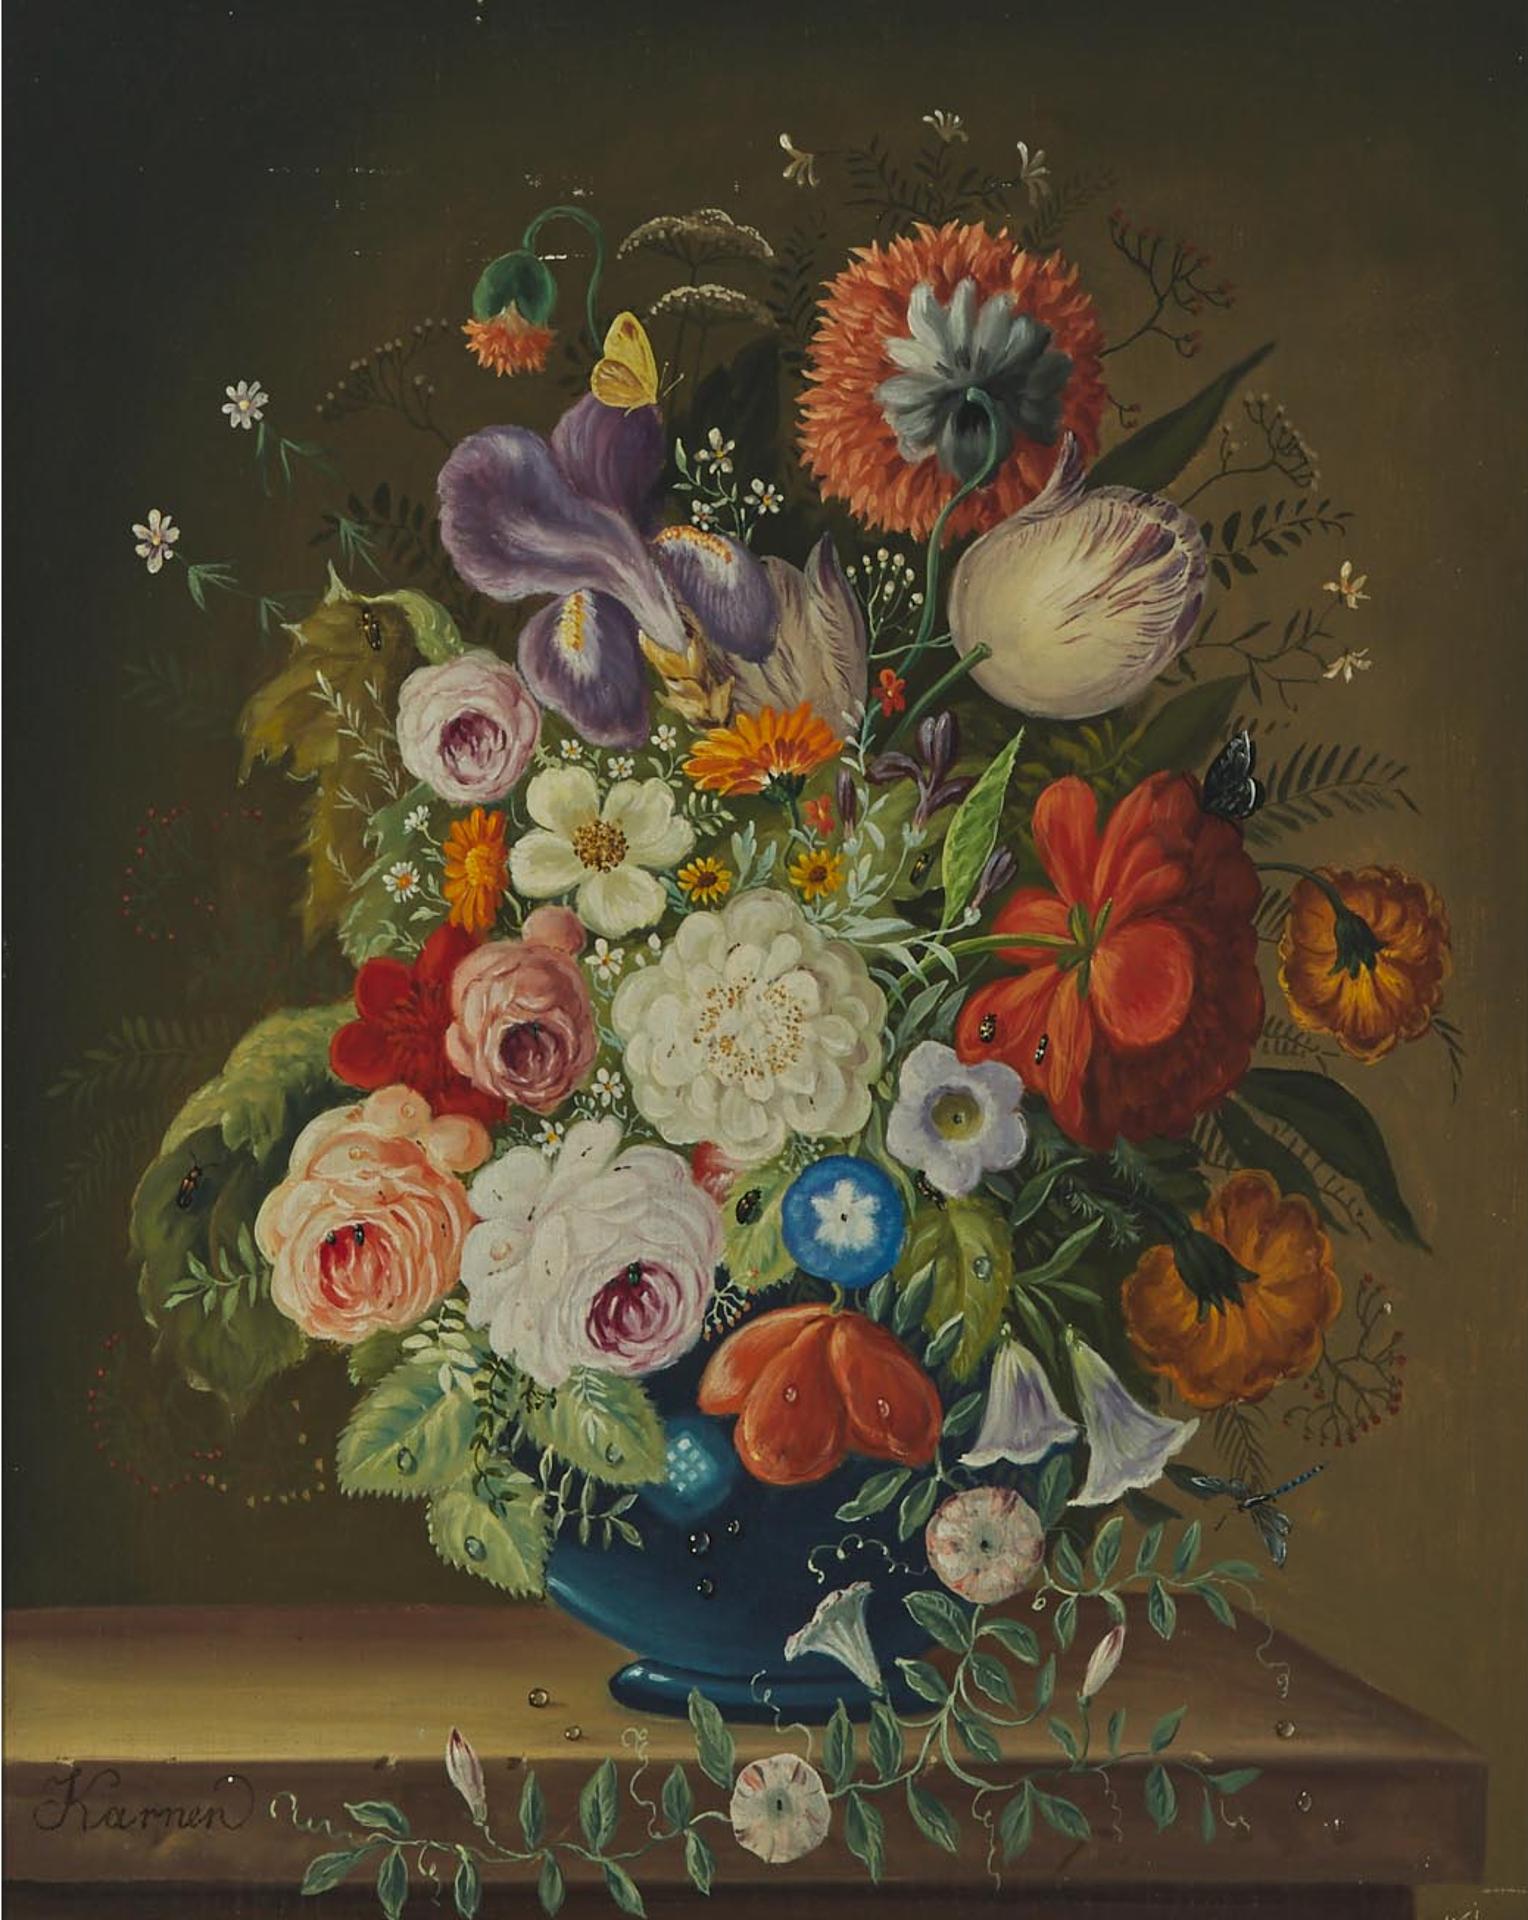 Christian Karner - Still Life Of Morning Glories, Roses, Irises, Tulips, Daisies, Chrysanthemums, Ferns And Vines With Butterflies, Insects And Dew Drops In A Blue Vase On A Ledge